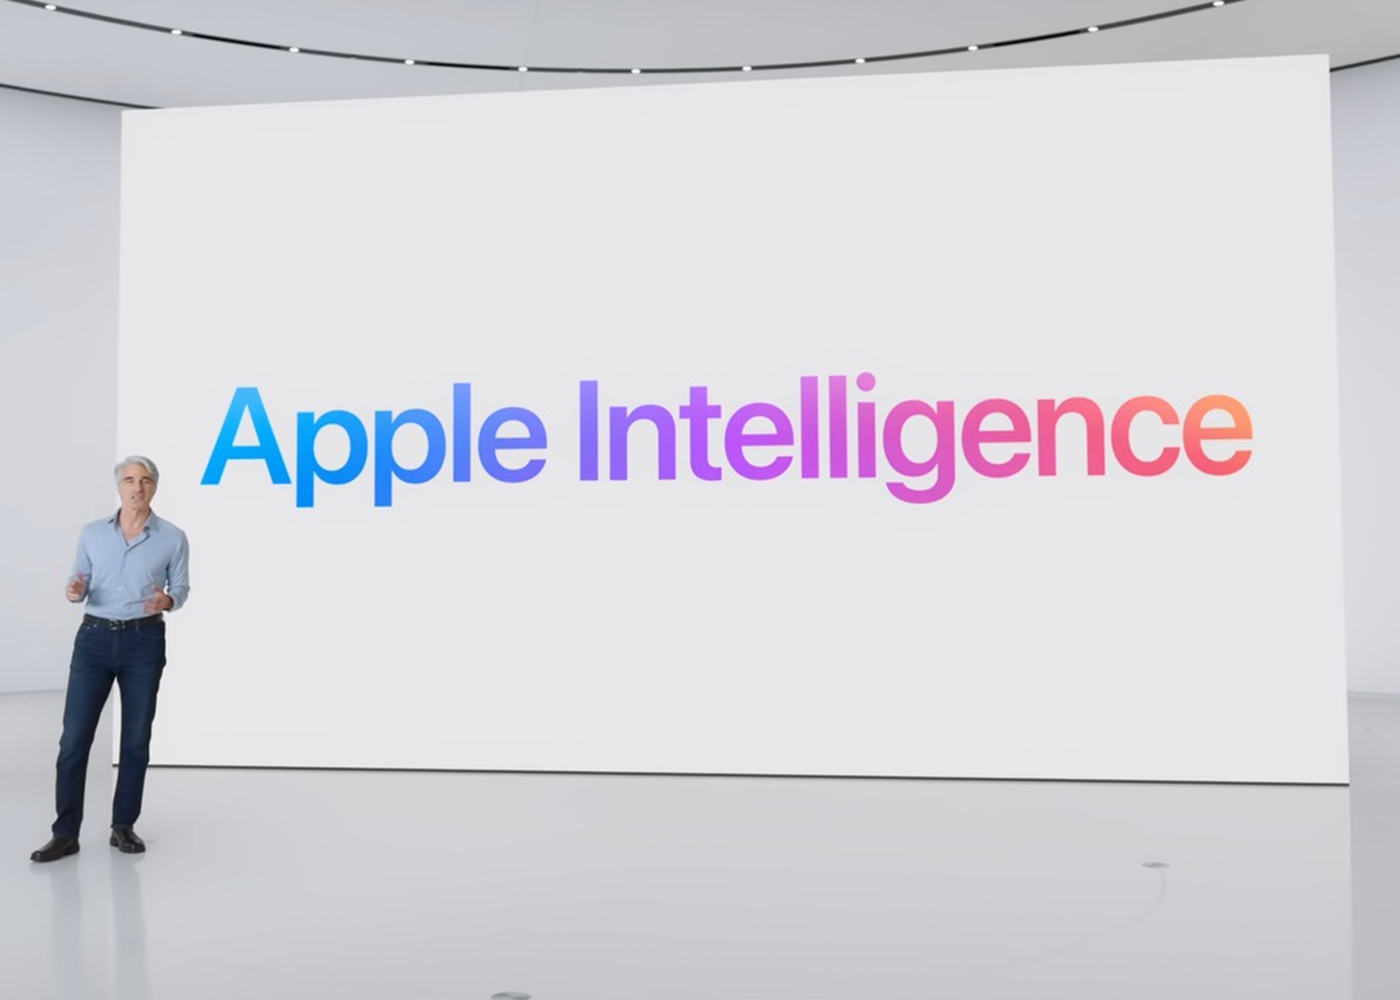 Apple Intelligence, the New AI from Apple